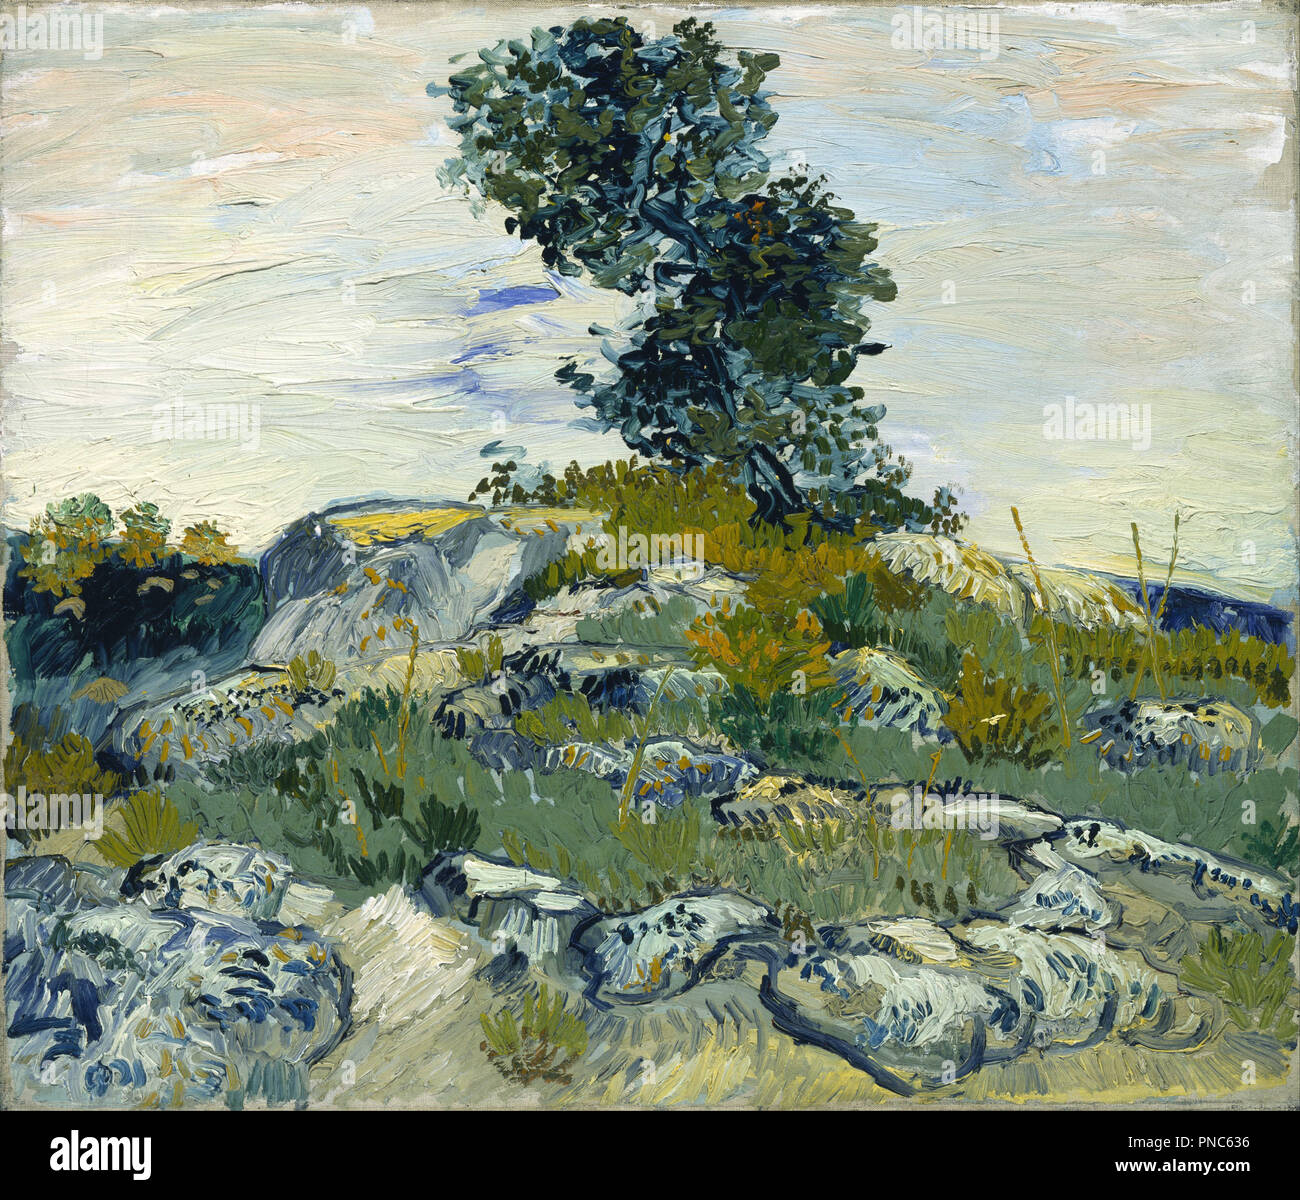 The Rocks / Rocks with Oak Tree. Date/Period: Arles, early July 1888. Painting. Oil on canvas. 54.9 × 65.7 cm (21.6 × 25.8 in). Author: VINCENT VAN GOGH. VAN GOGH, VINCENT. Stock Photo